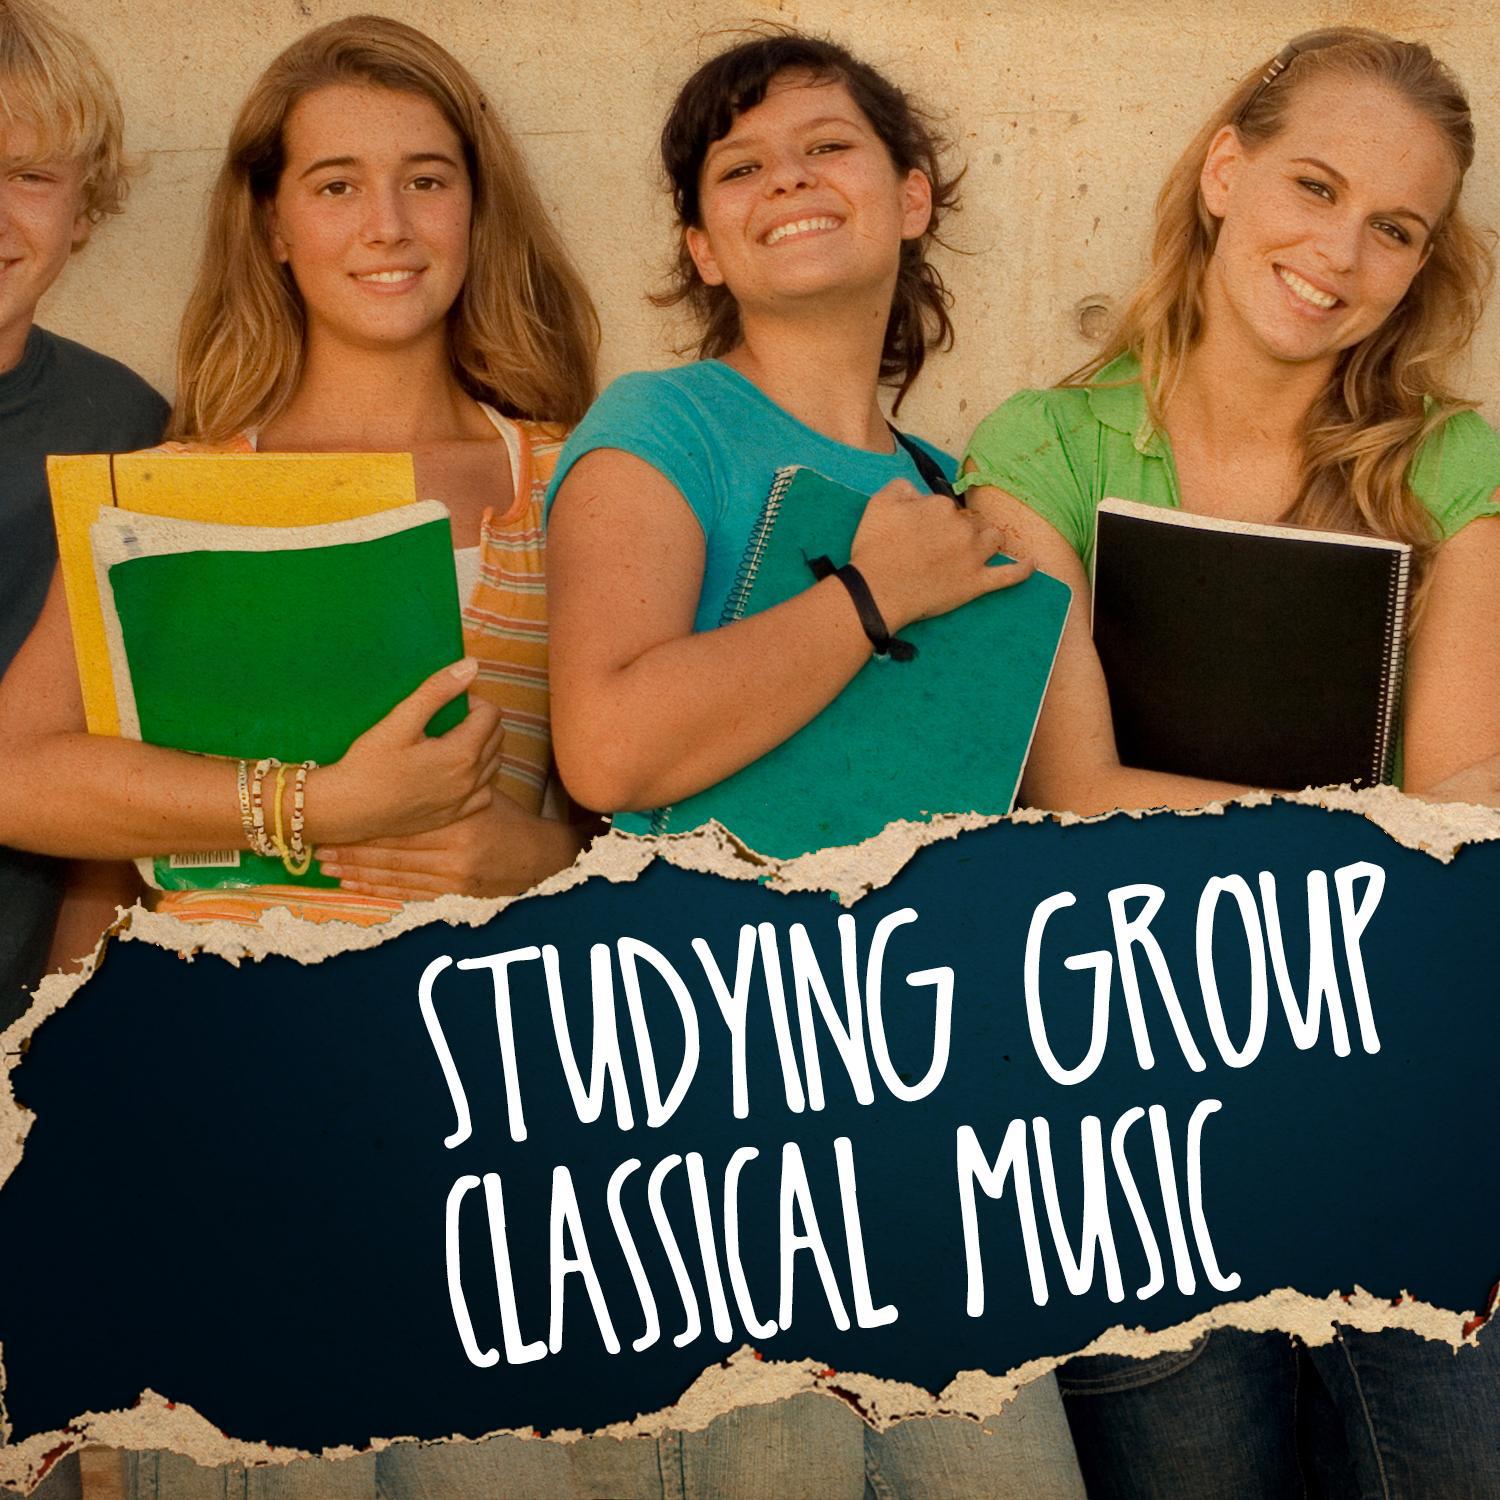 Studying Group Classical Music